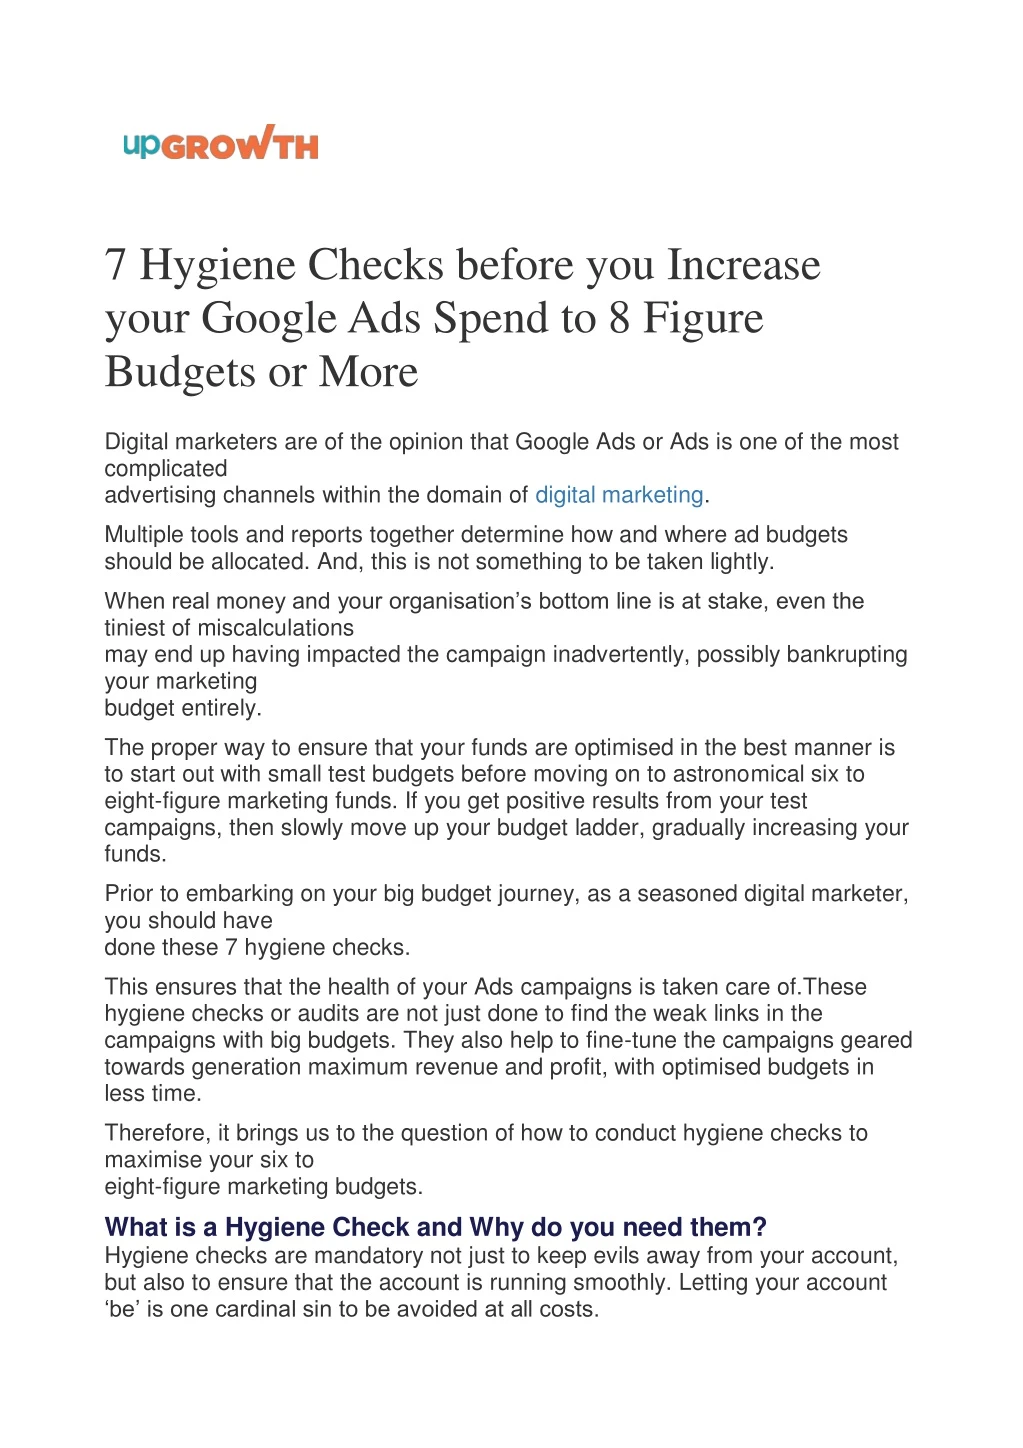 7 hygiene checks before you increase your google